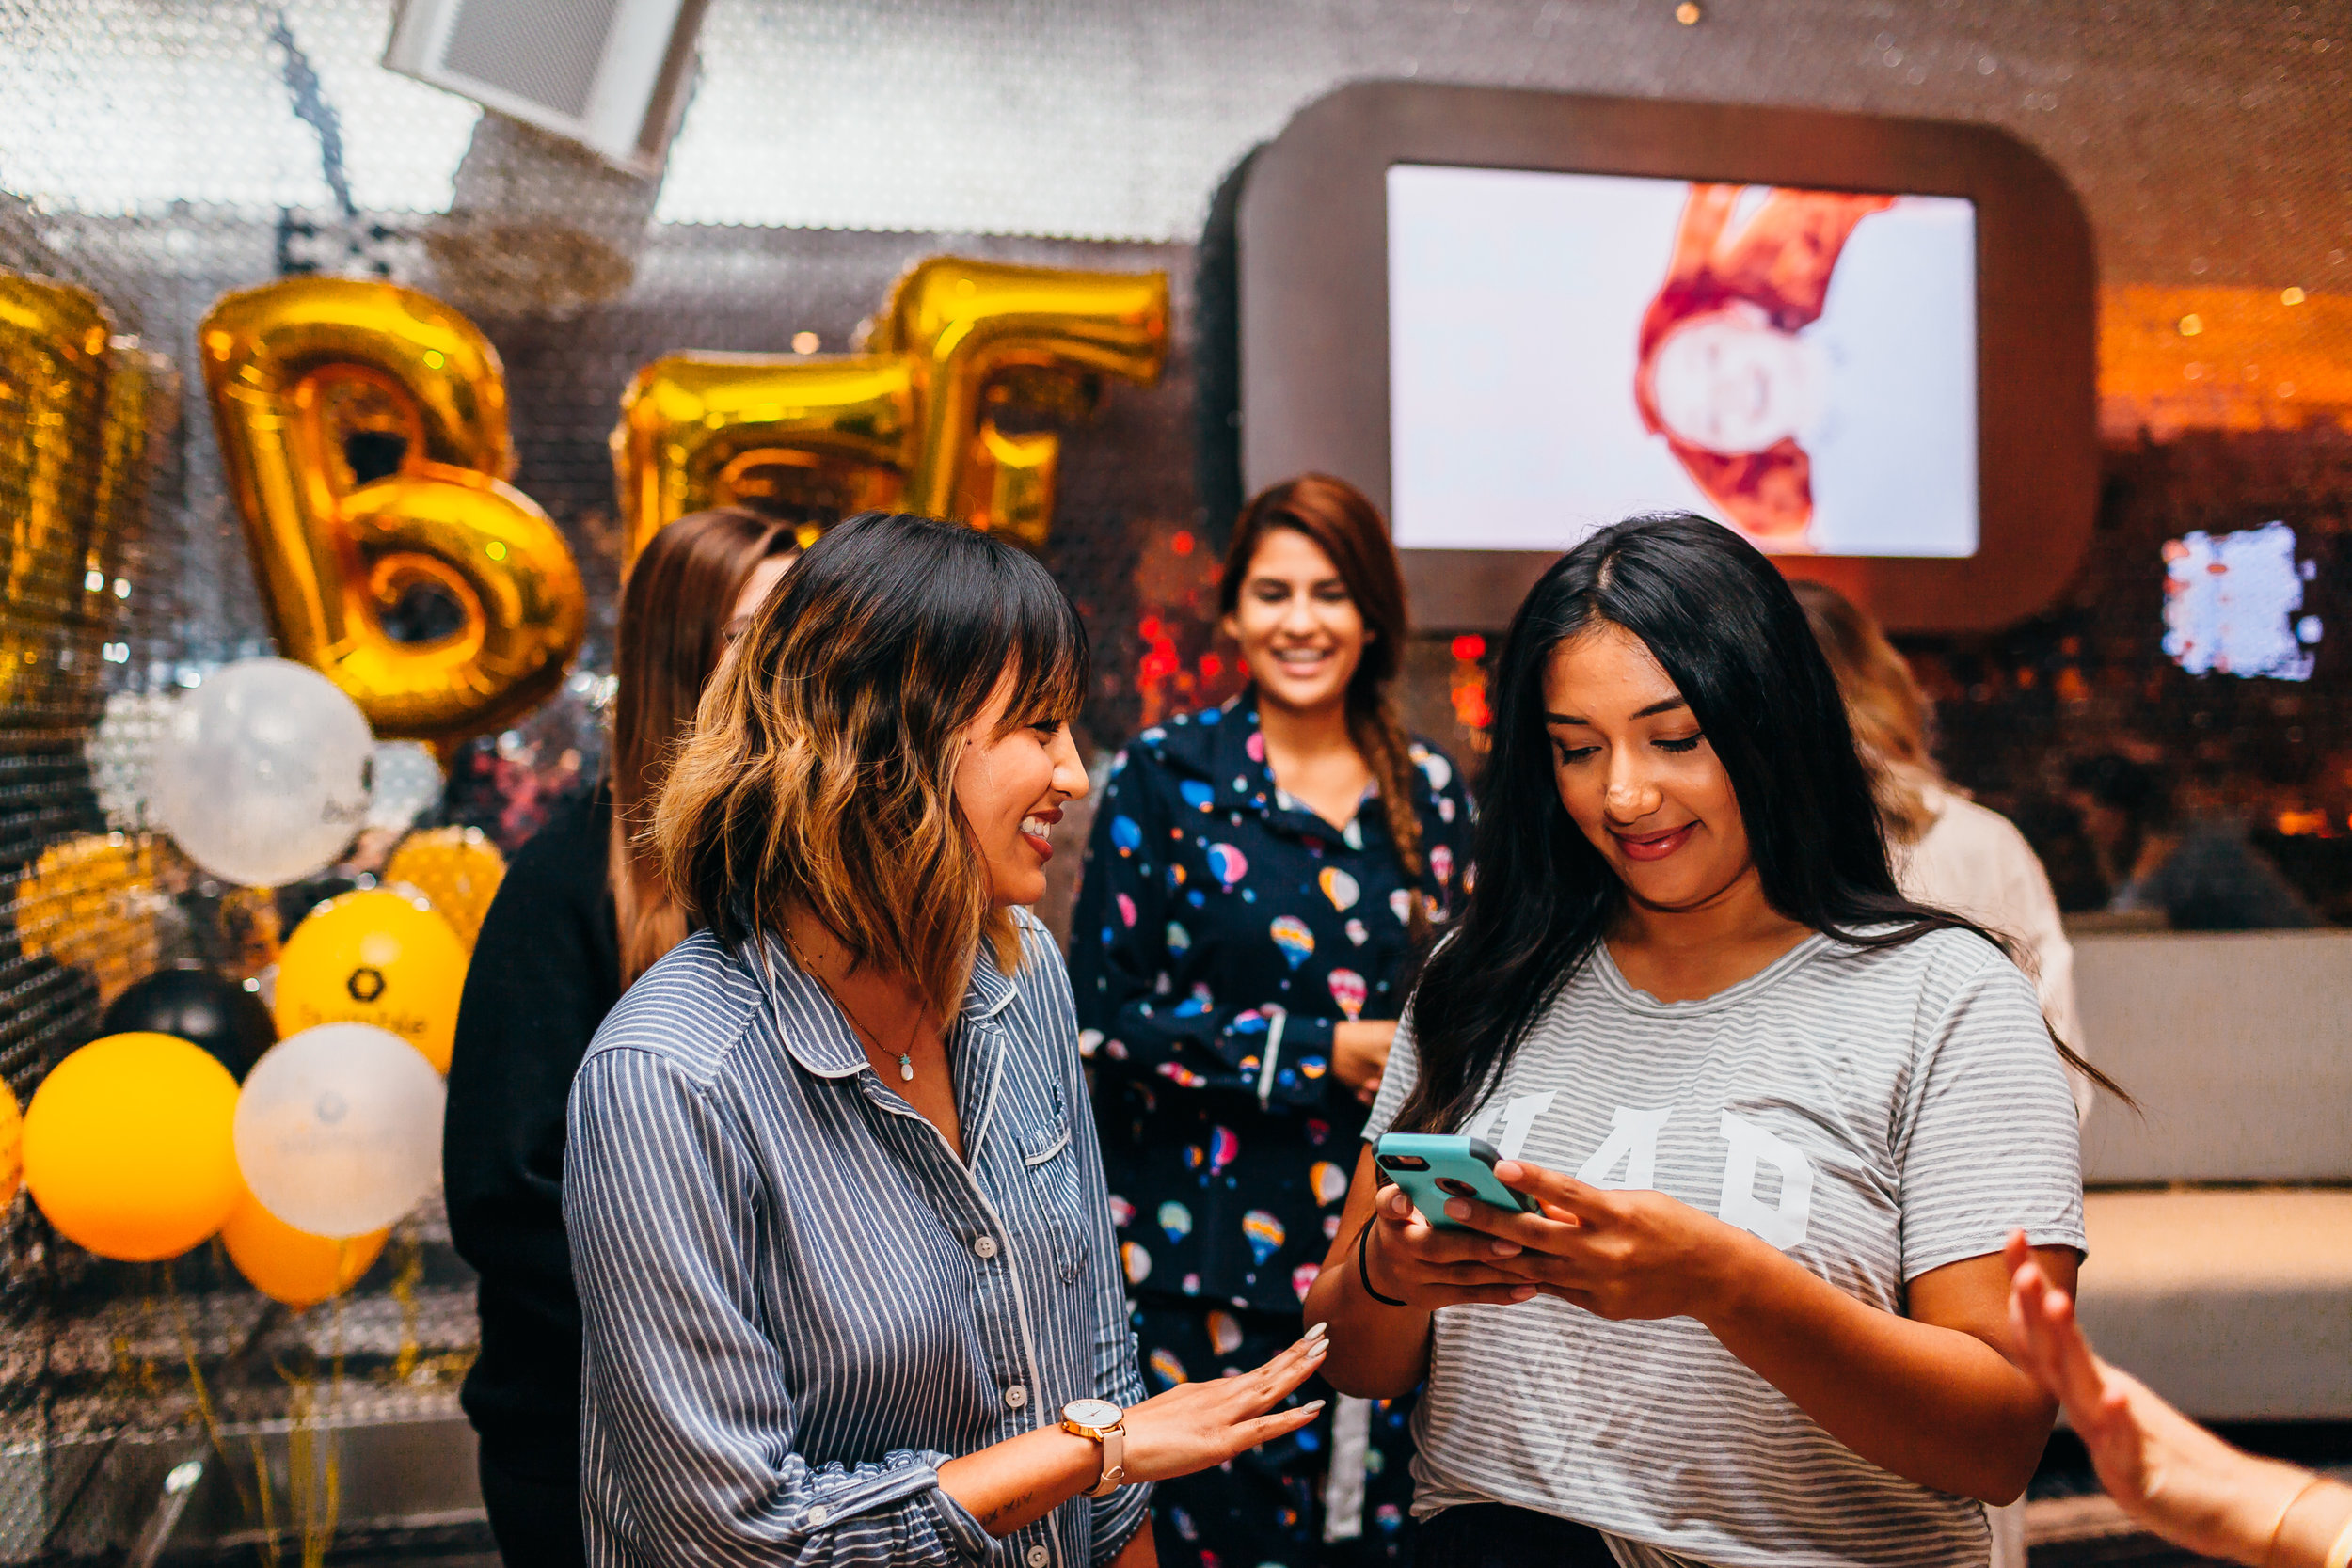 bumble-bff-dallas-launch-event-6536.jpg